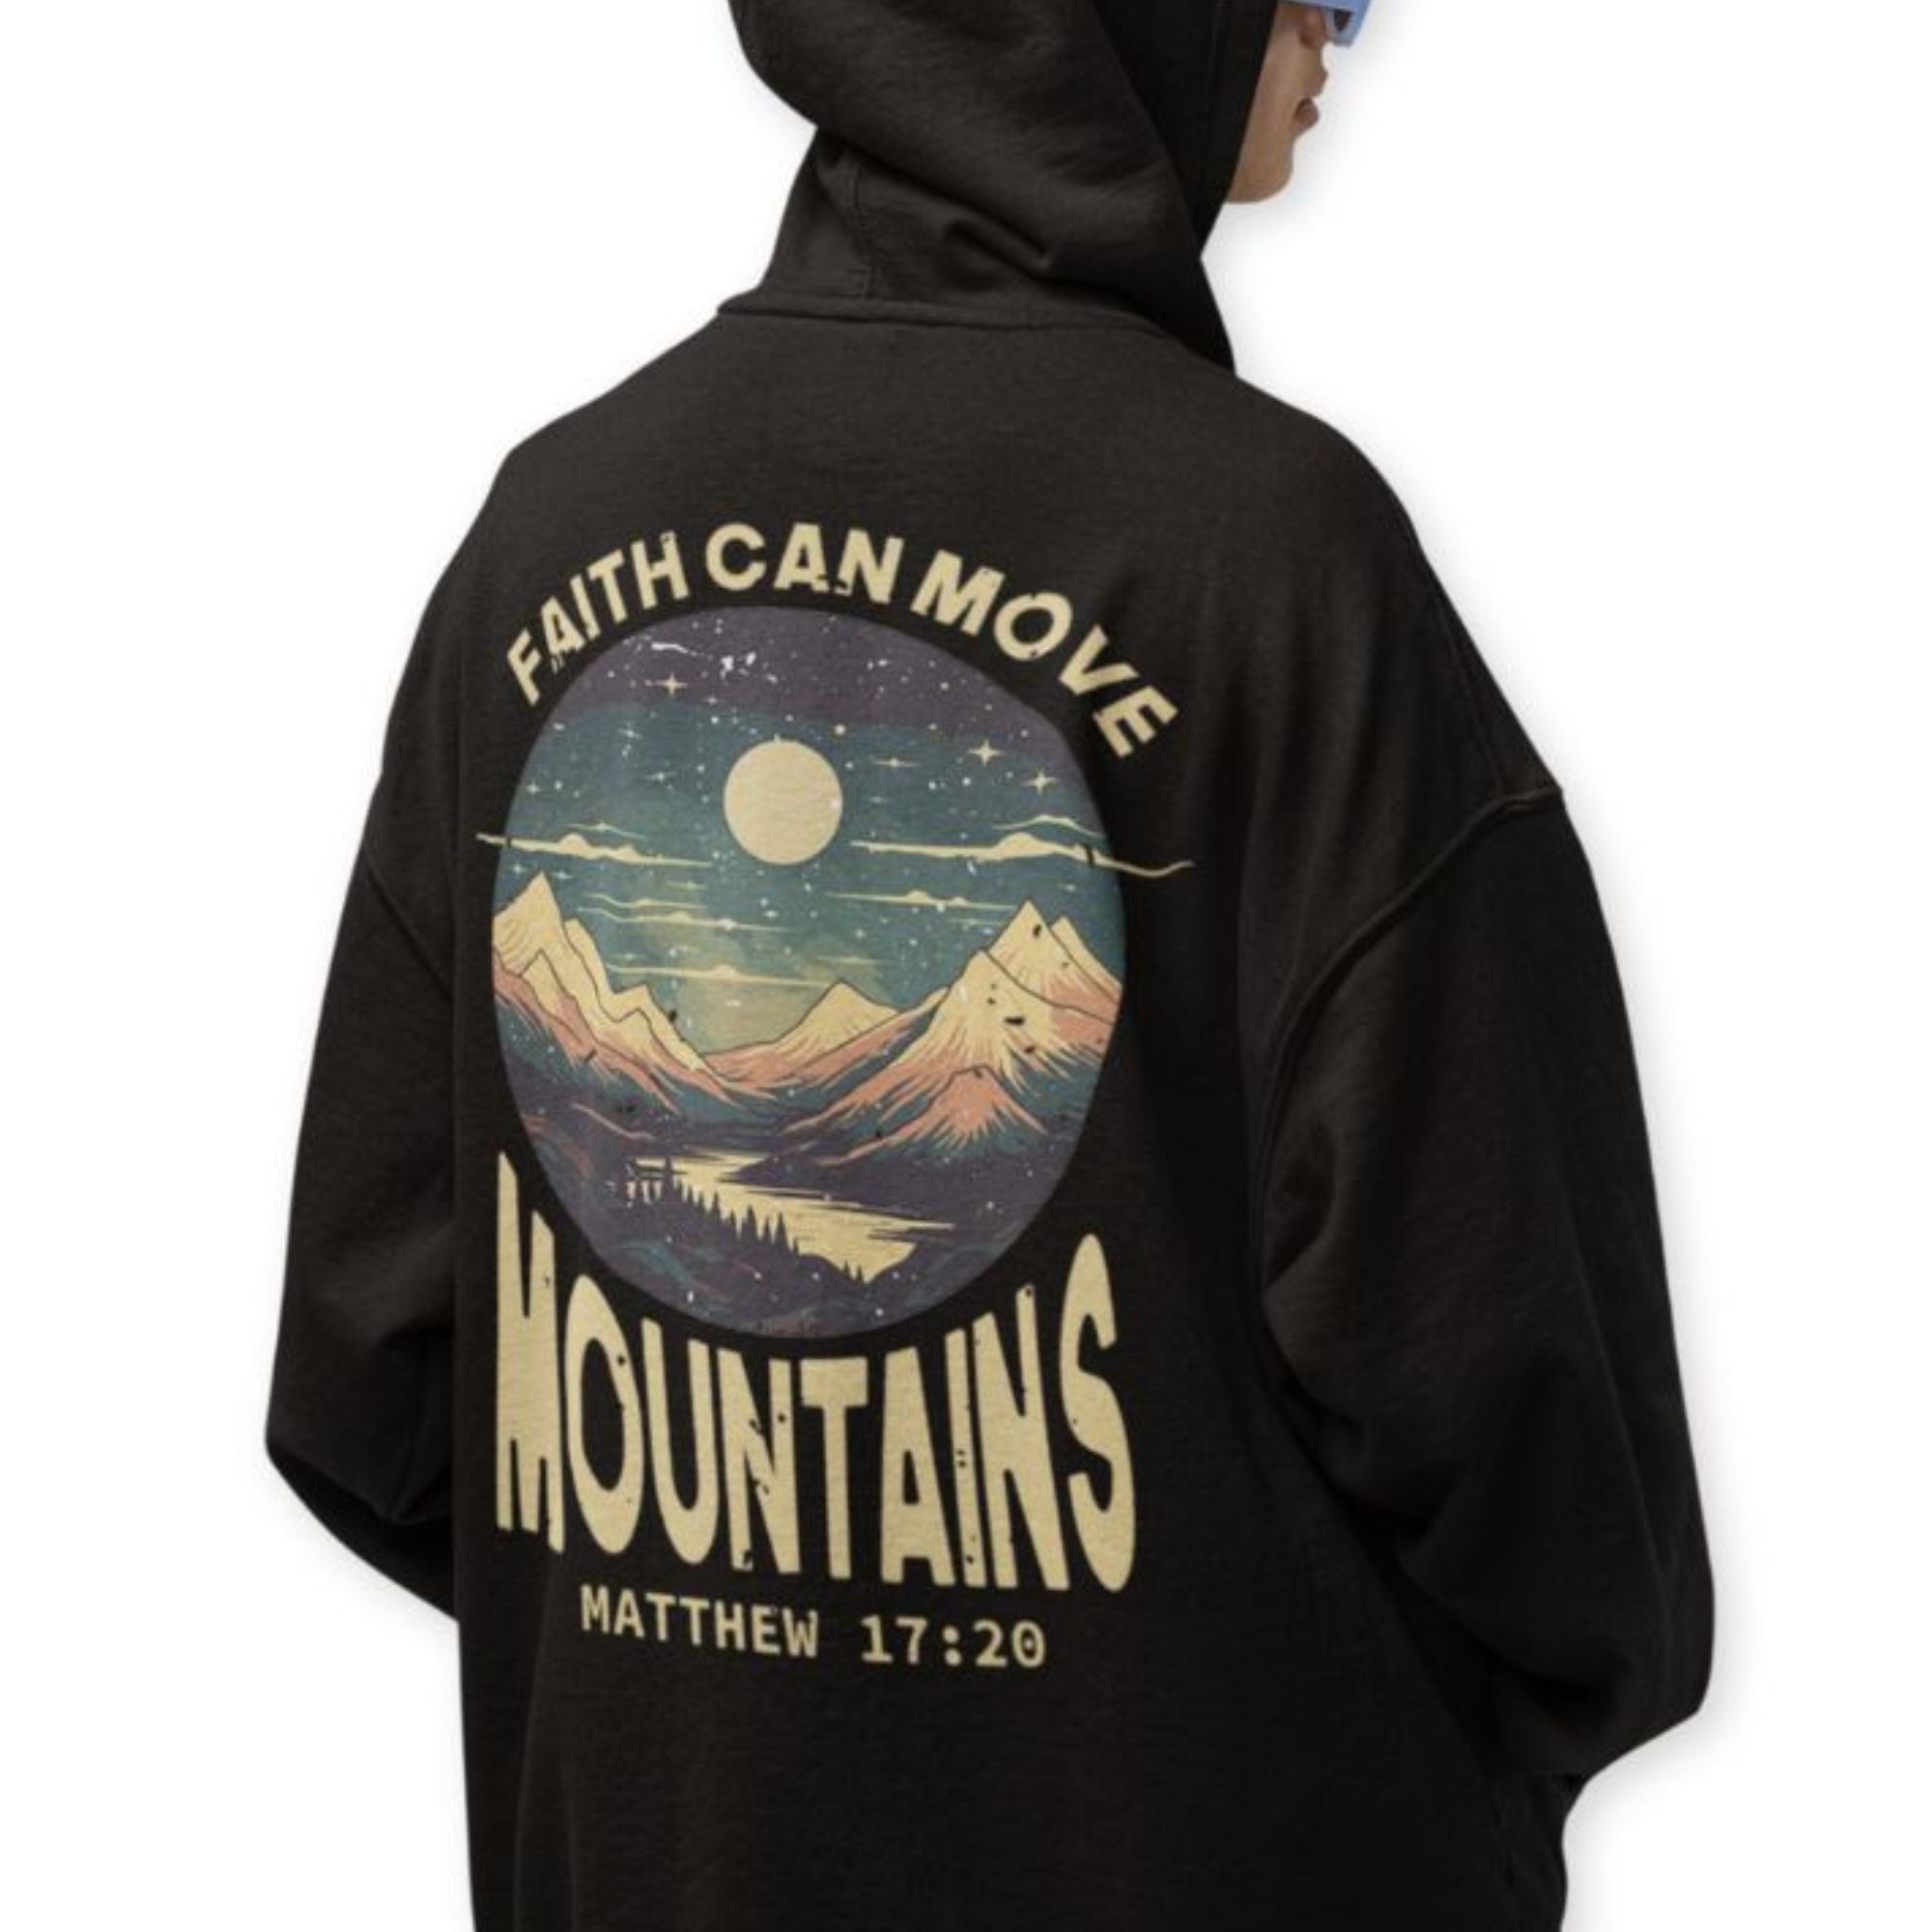 Faith Can Move Mountains Retro-Inspired Premium Unisex Hooded Jacket Heavy Blend™ Size: S Color: Black Jesus Passion Apparel